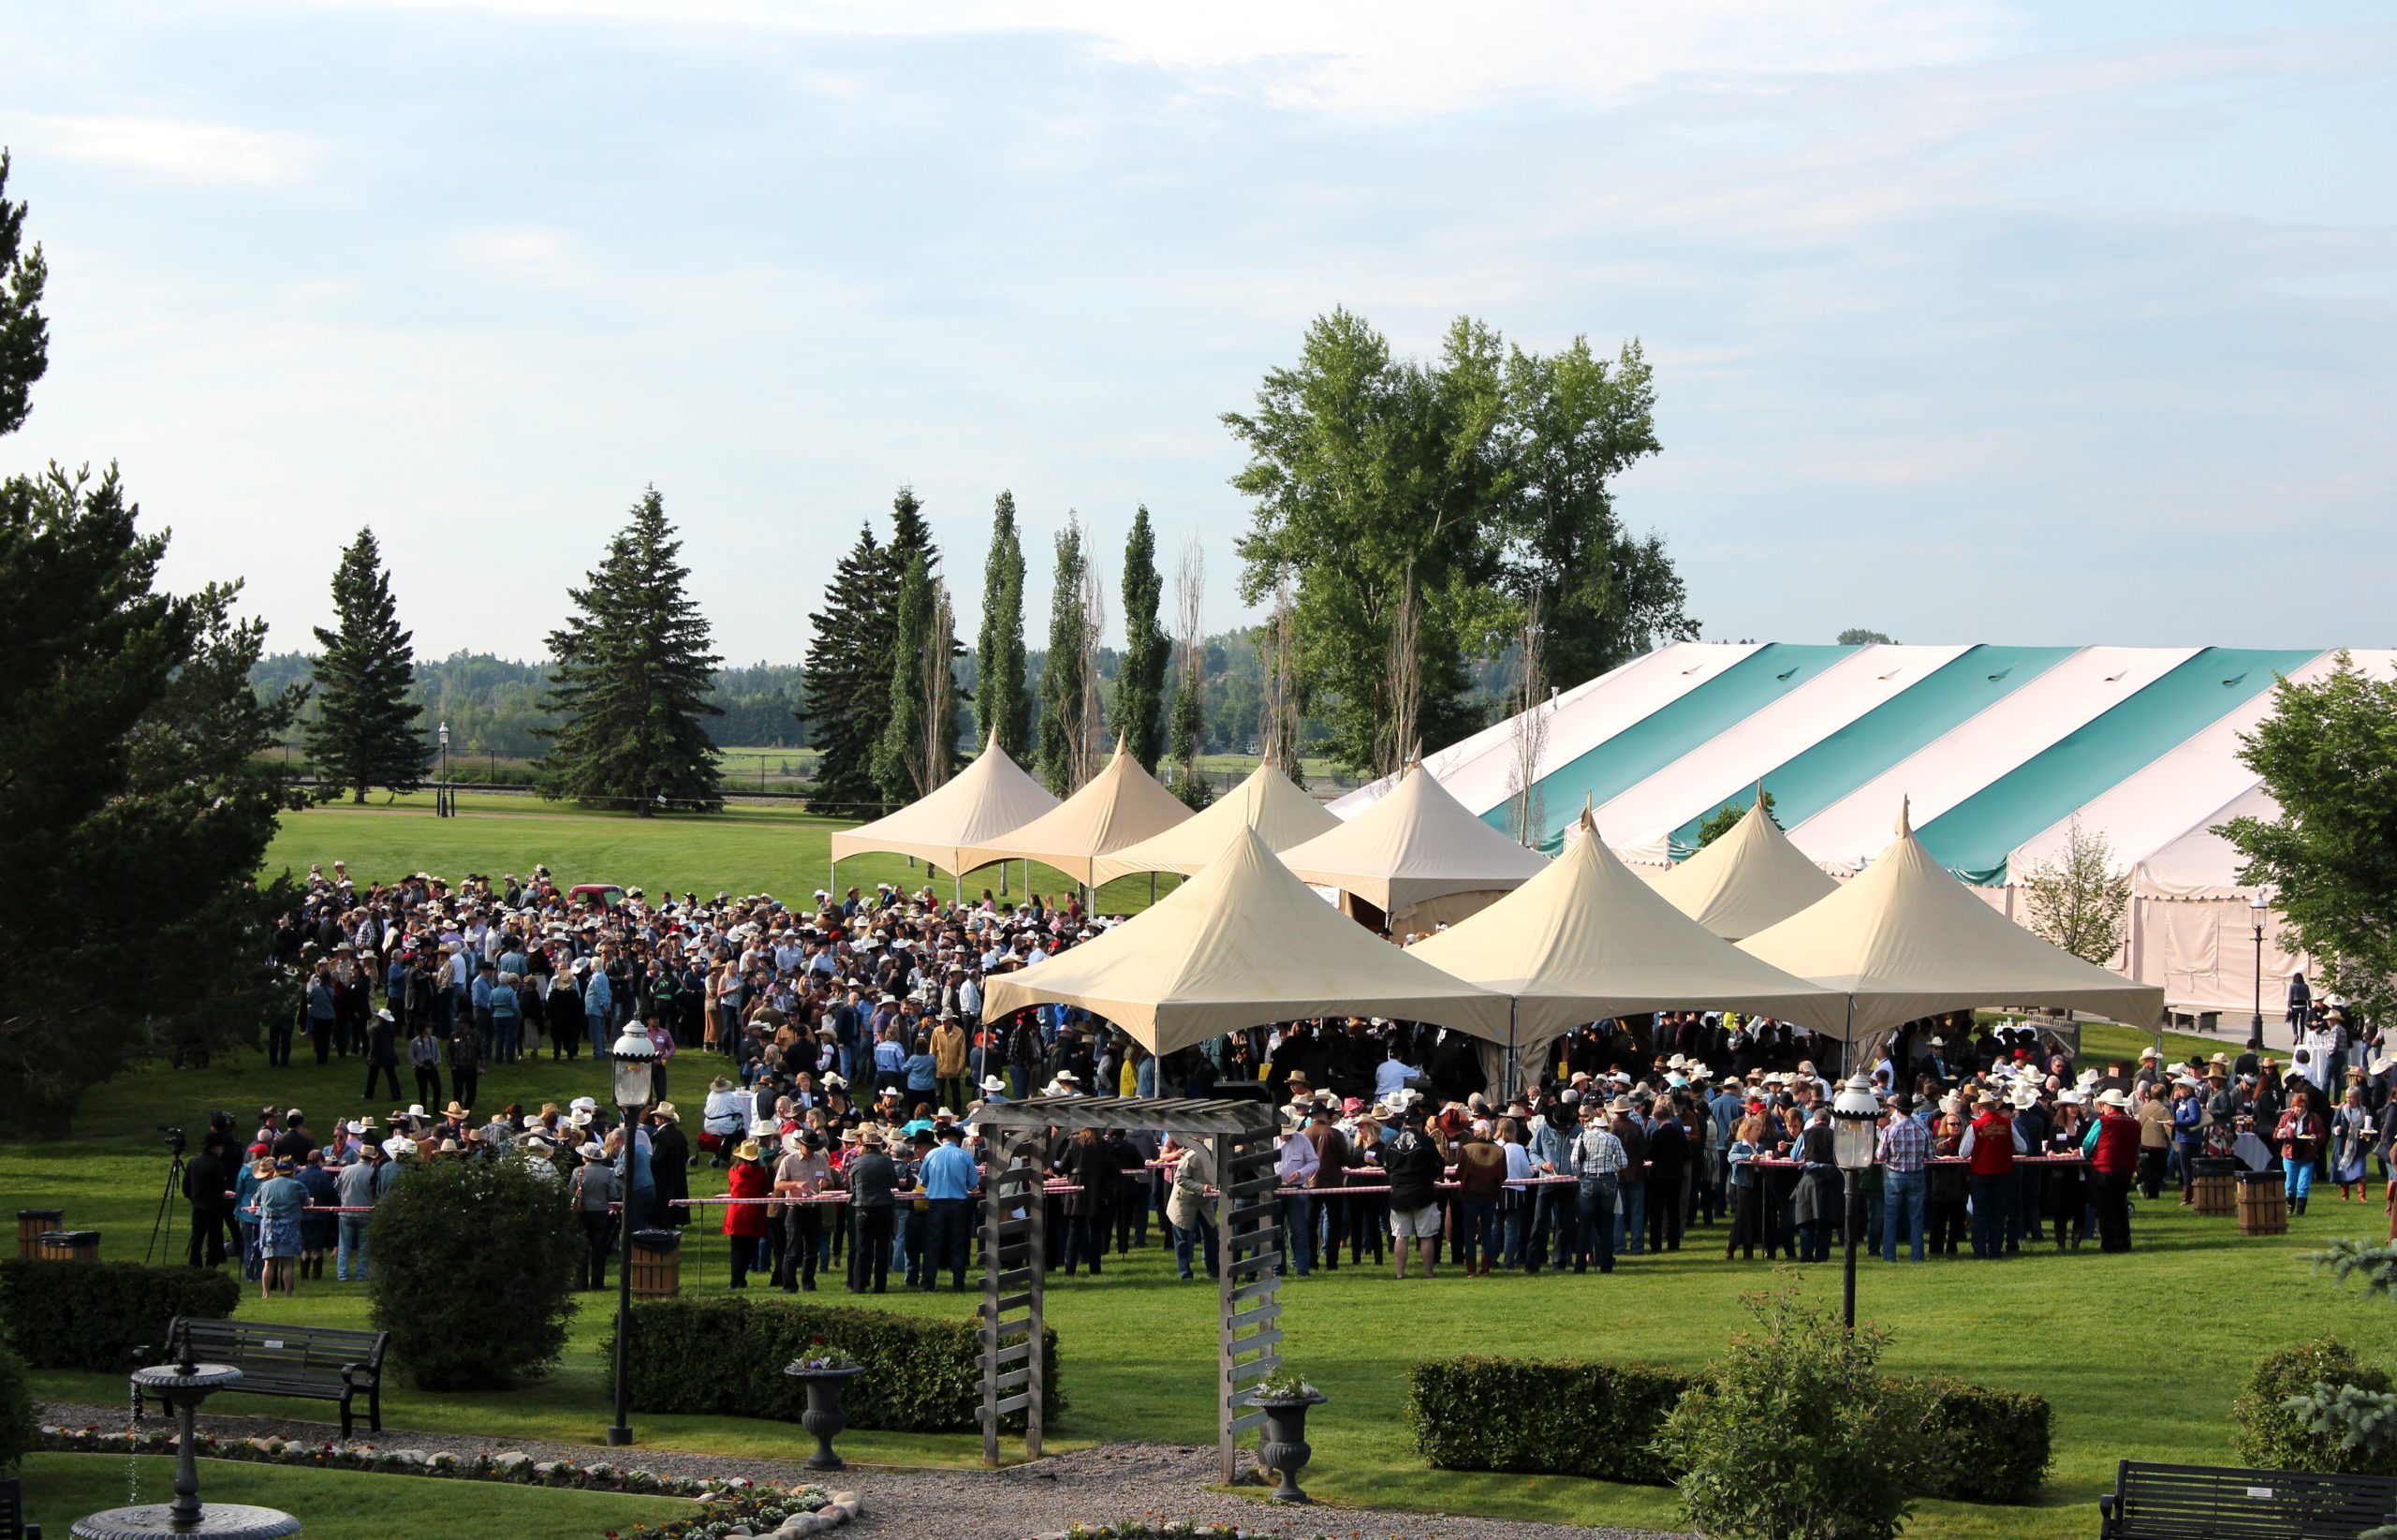 A large gathering of people at a Stampede party in the Chautauqua Tents at Heritage Park